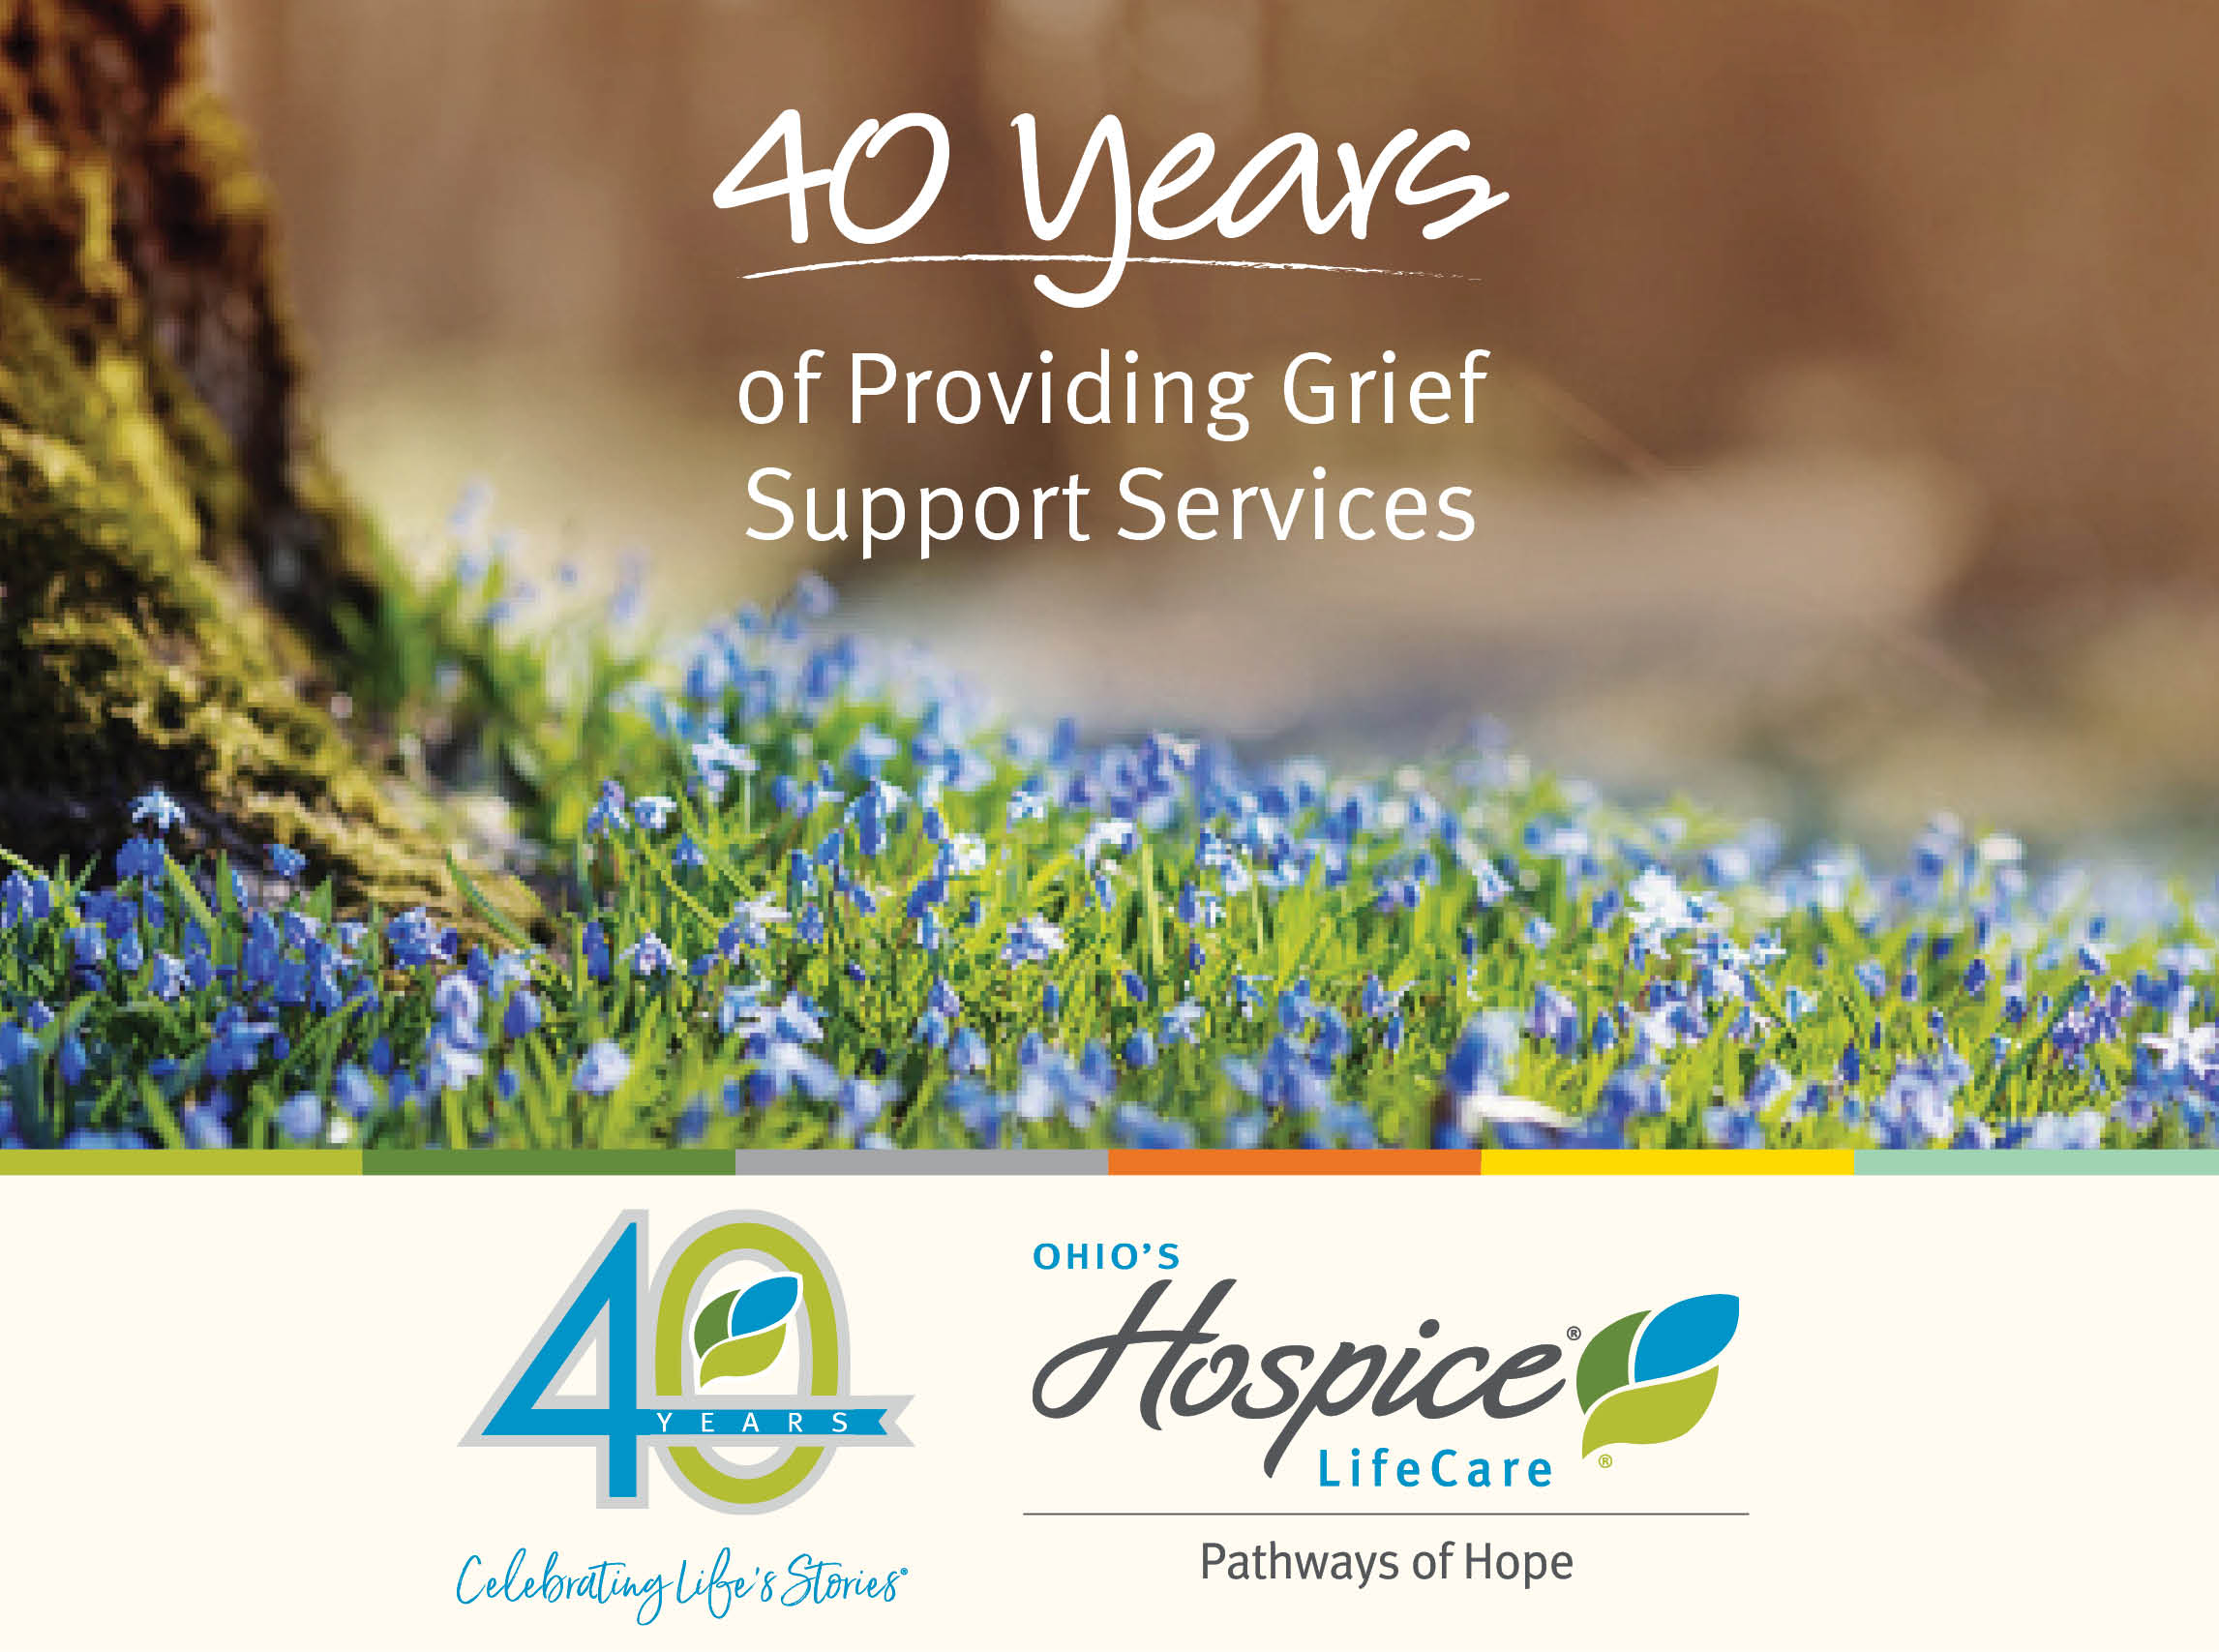 40 Years of Providing Grief Support Services | Ohio's Hospice LifeCare Pathways of Hope